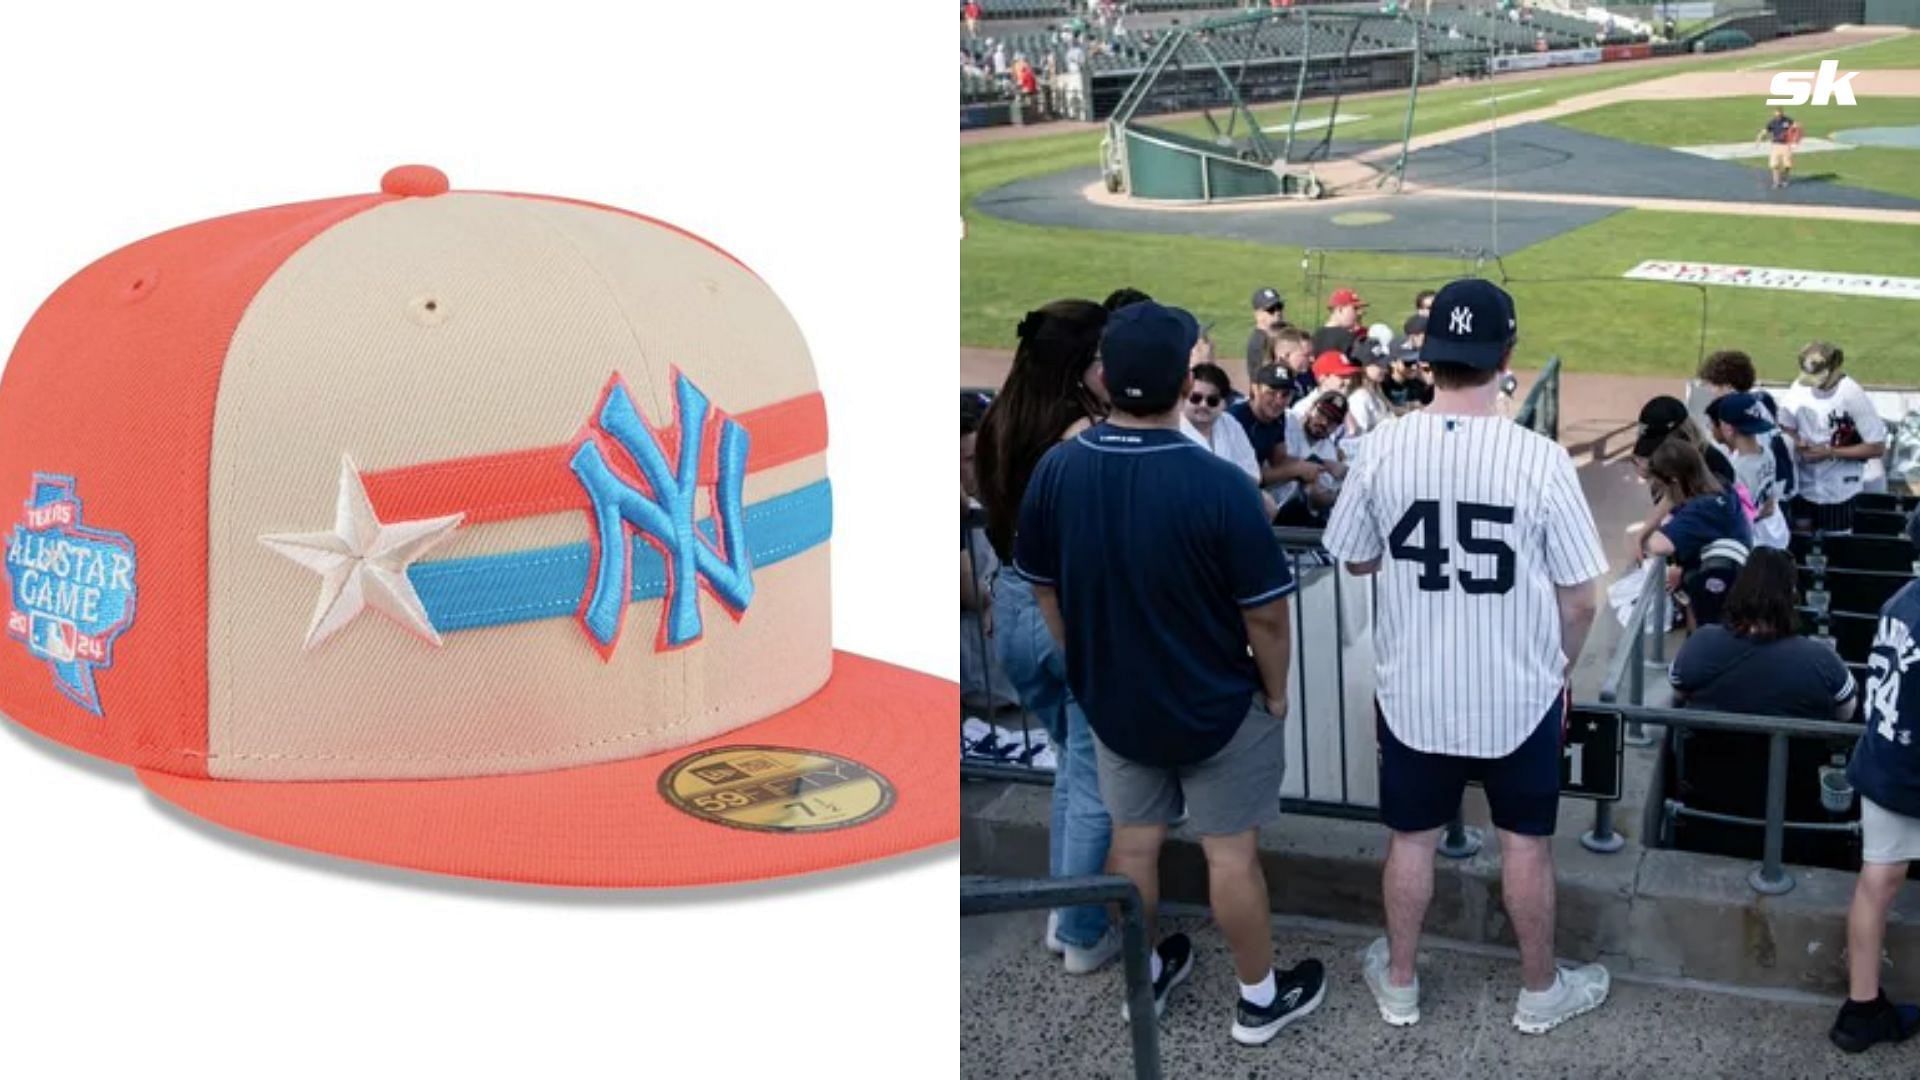 PHOTO: Yankees break tradition with eye-catching All-Star game hat design